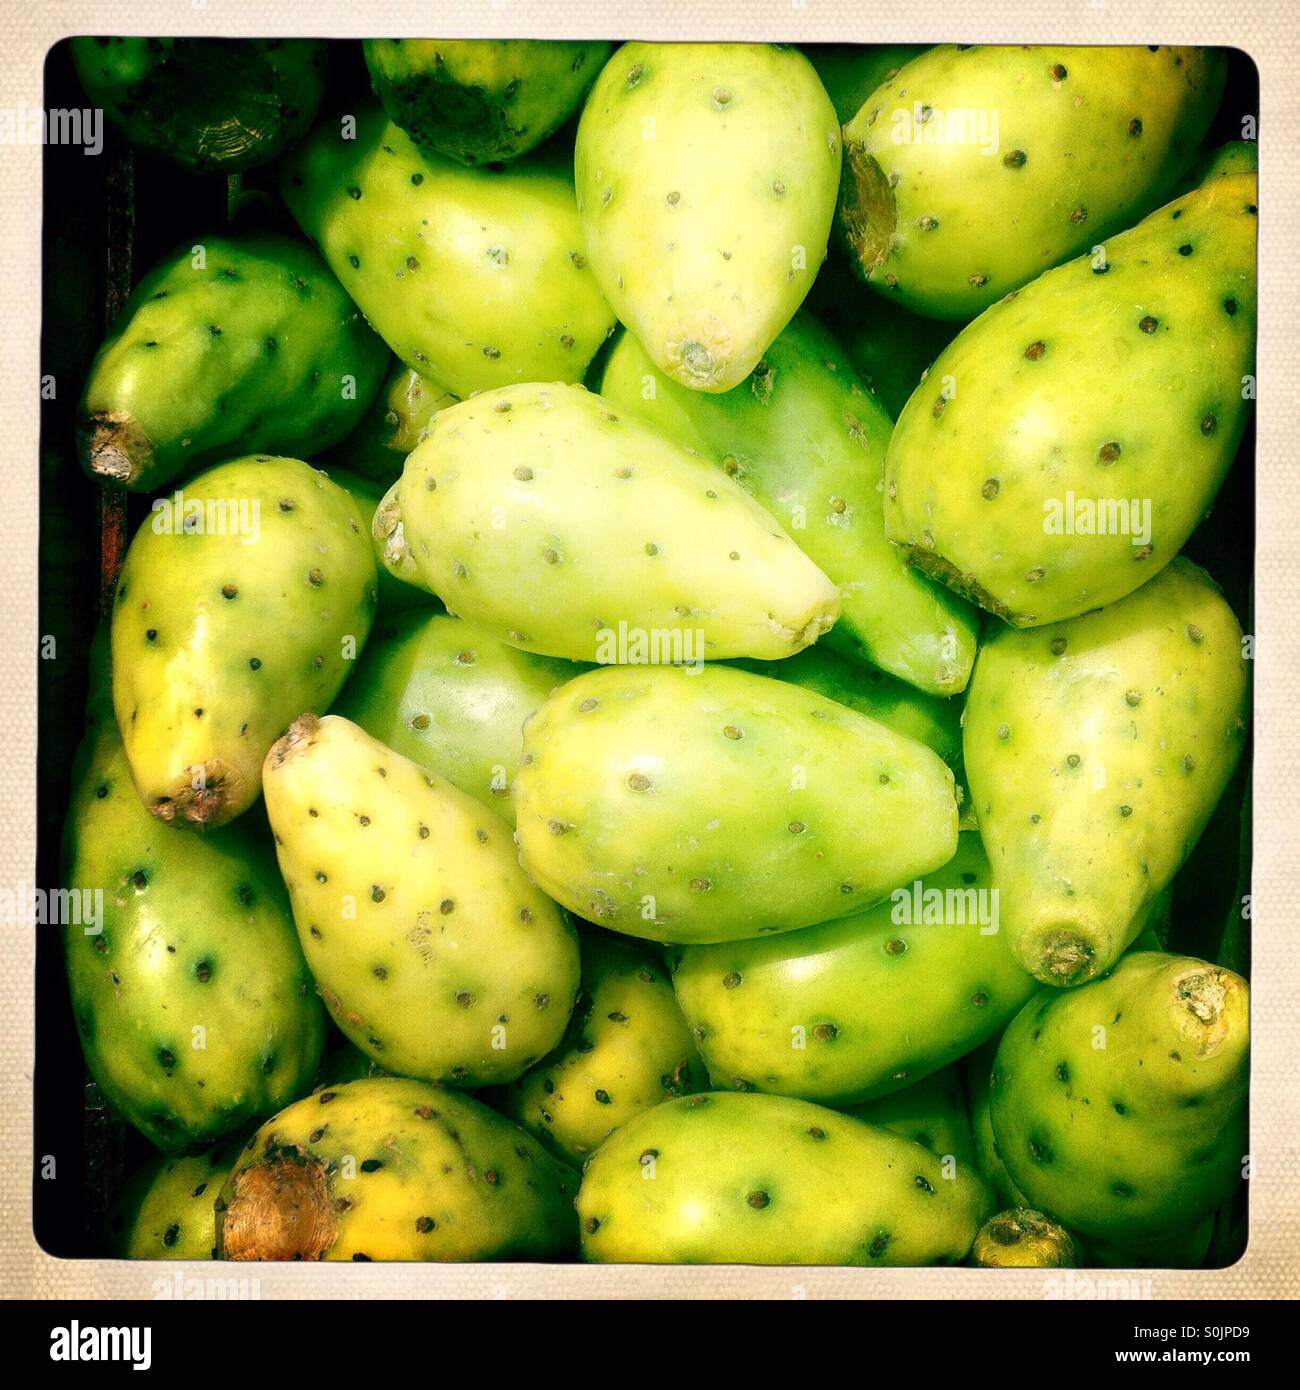 Prickly pears for sale Cuetzalan, Sierra Madre of Puebla, Mexico Stock Photo